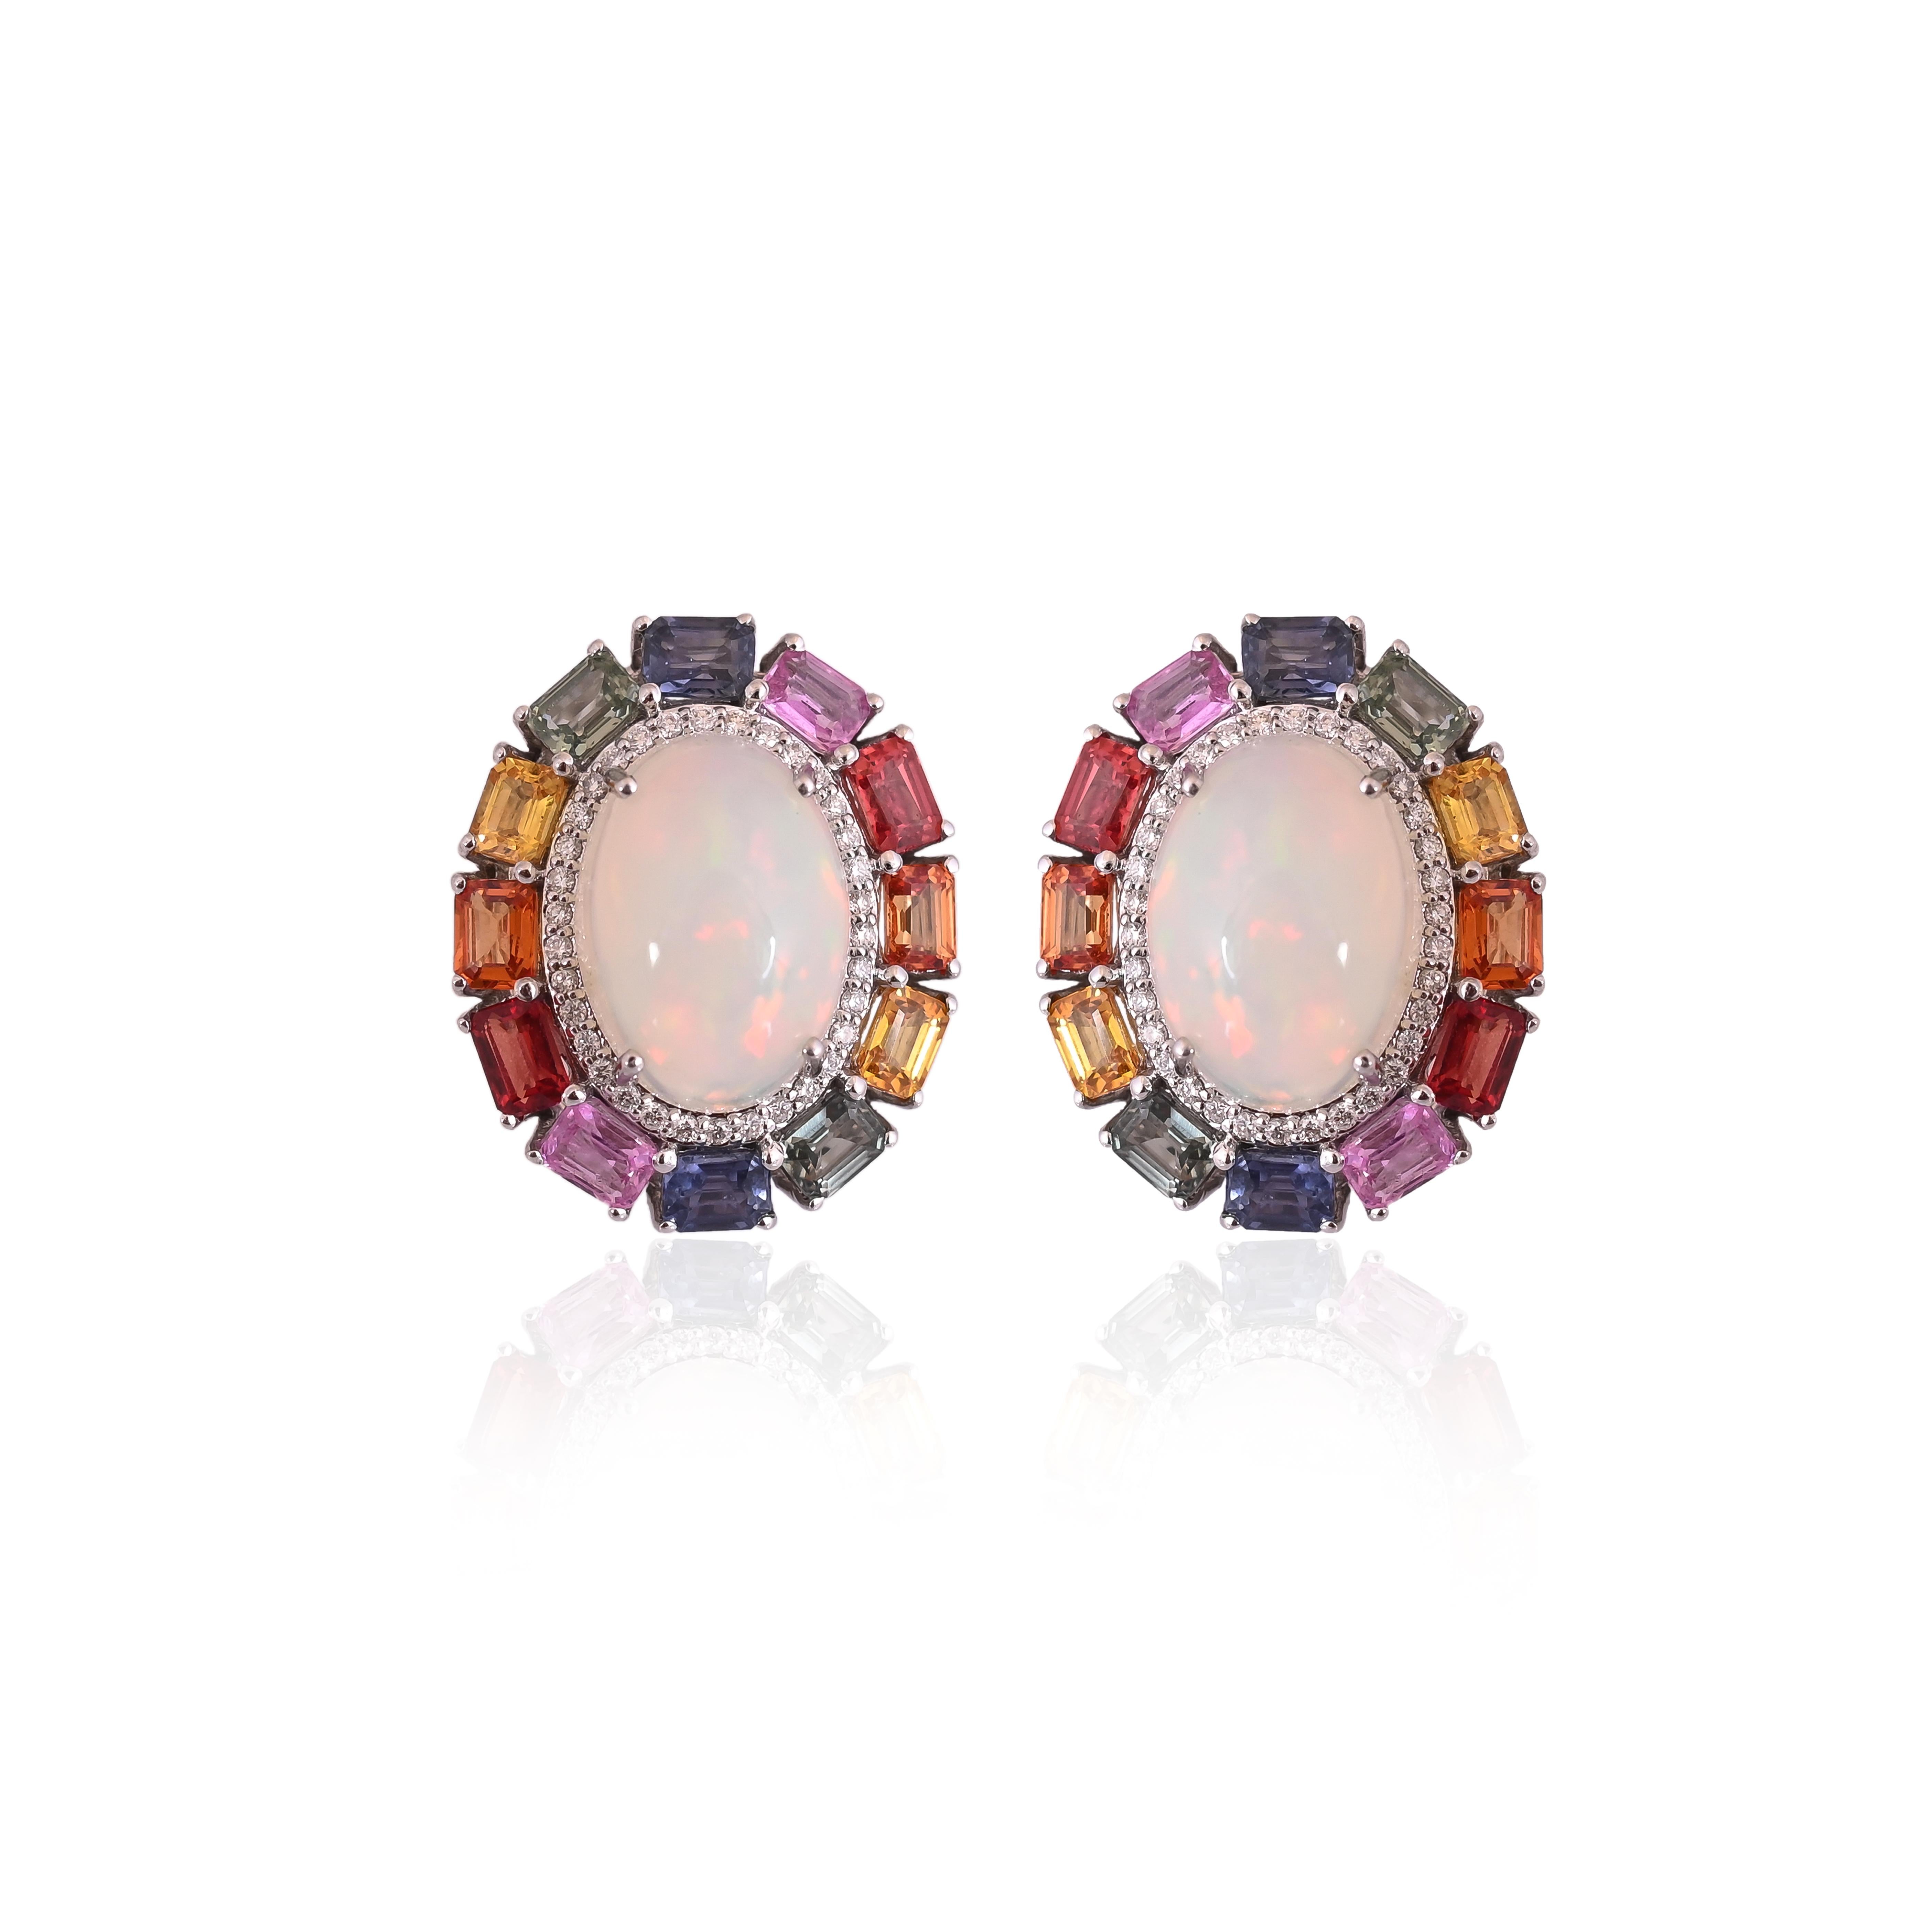 A very gorgeous and stunning, modern style, Opal & Multi Sapphires Stud Earrings set in 18K White Gold & Diamonds. The weight of the Opals is 7.90 carats. The Opals are of Ethiopian origin and have an Orange - Green play of colour. The Multi